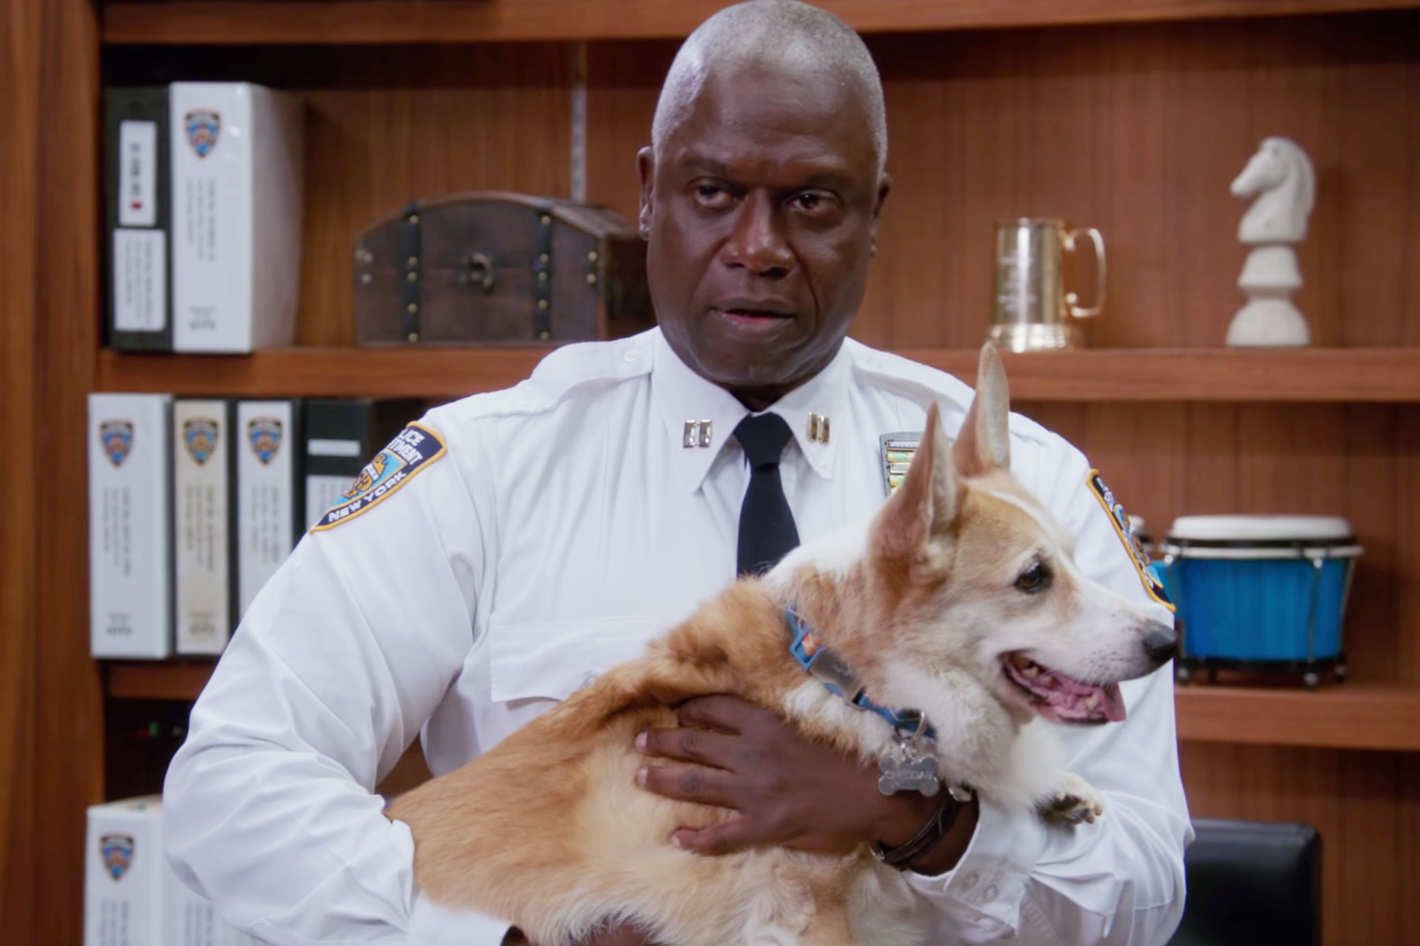 Farewell To The Corgi Who Played Cheddar, The Most Uncommon Bitch On ‘Brooklyn Nine-Nine’